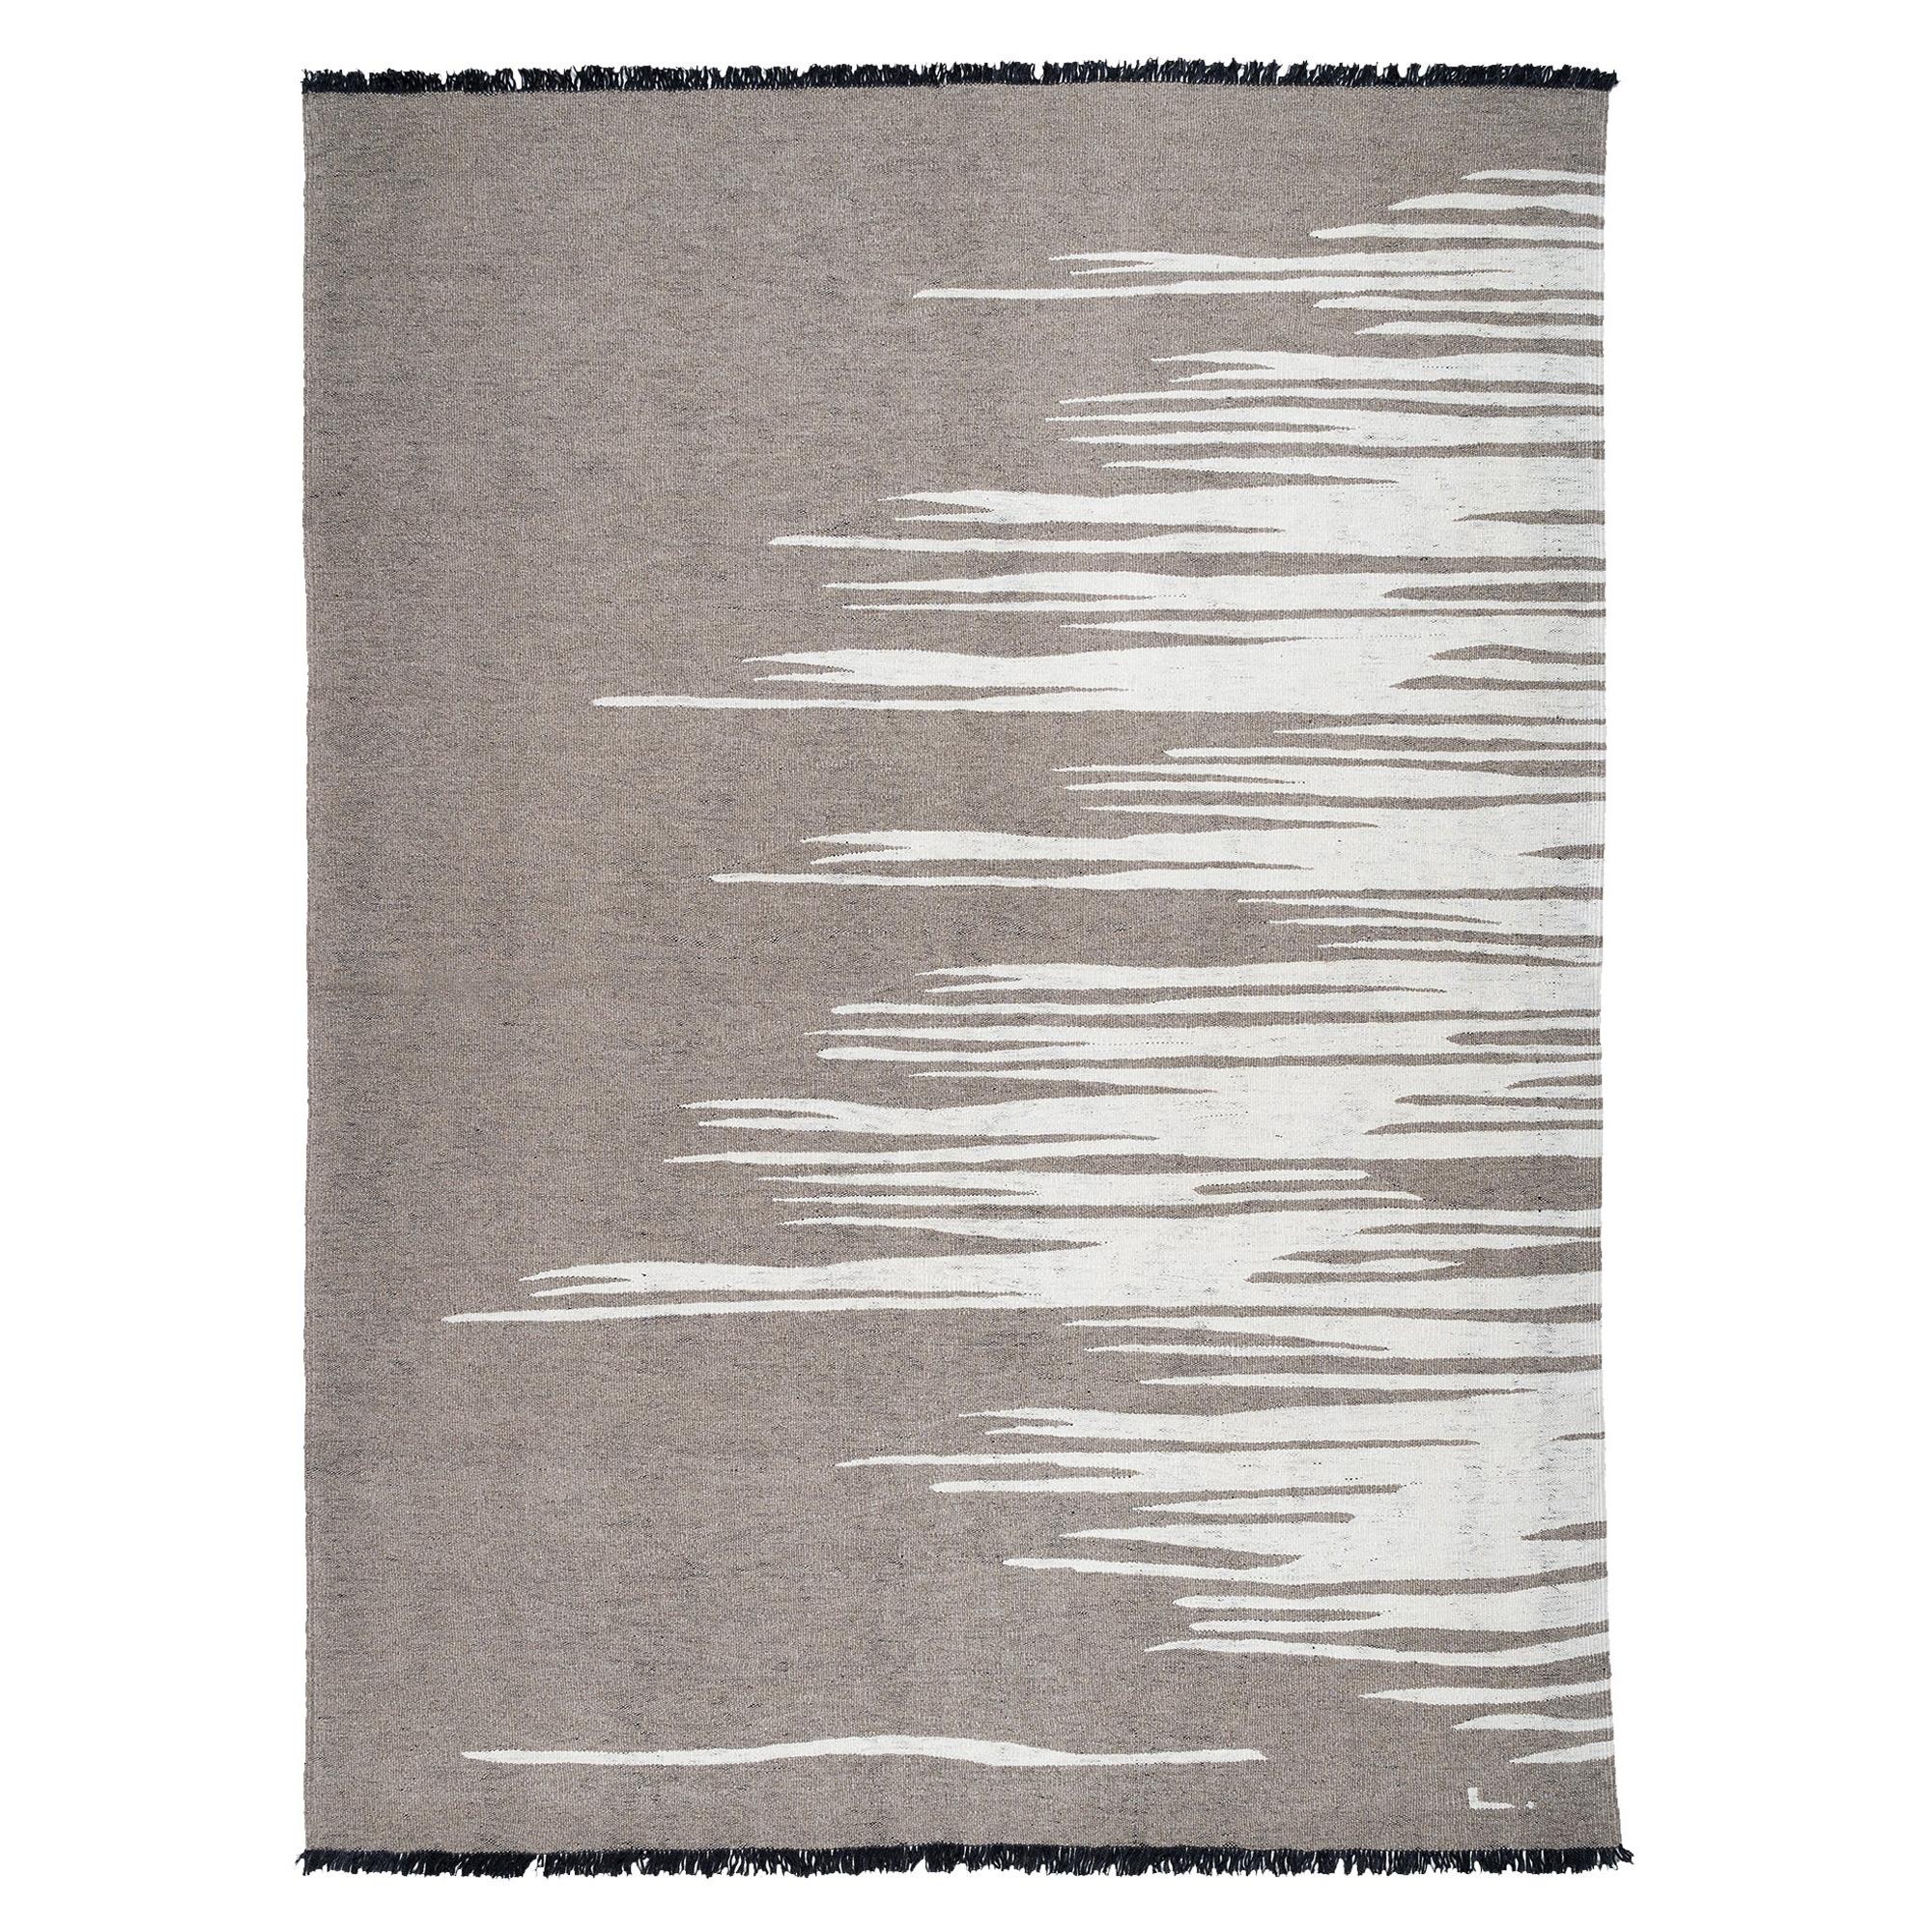 Ege No 3 Contemporary Kilim Rug Wool Handwoven Earthy Gray and Dune White im Angebot